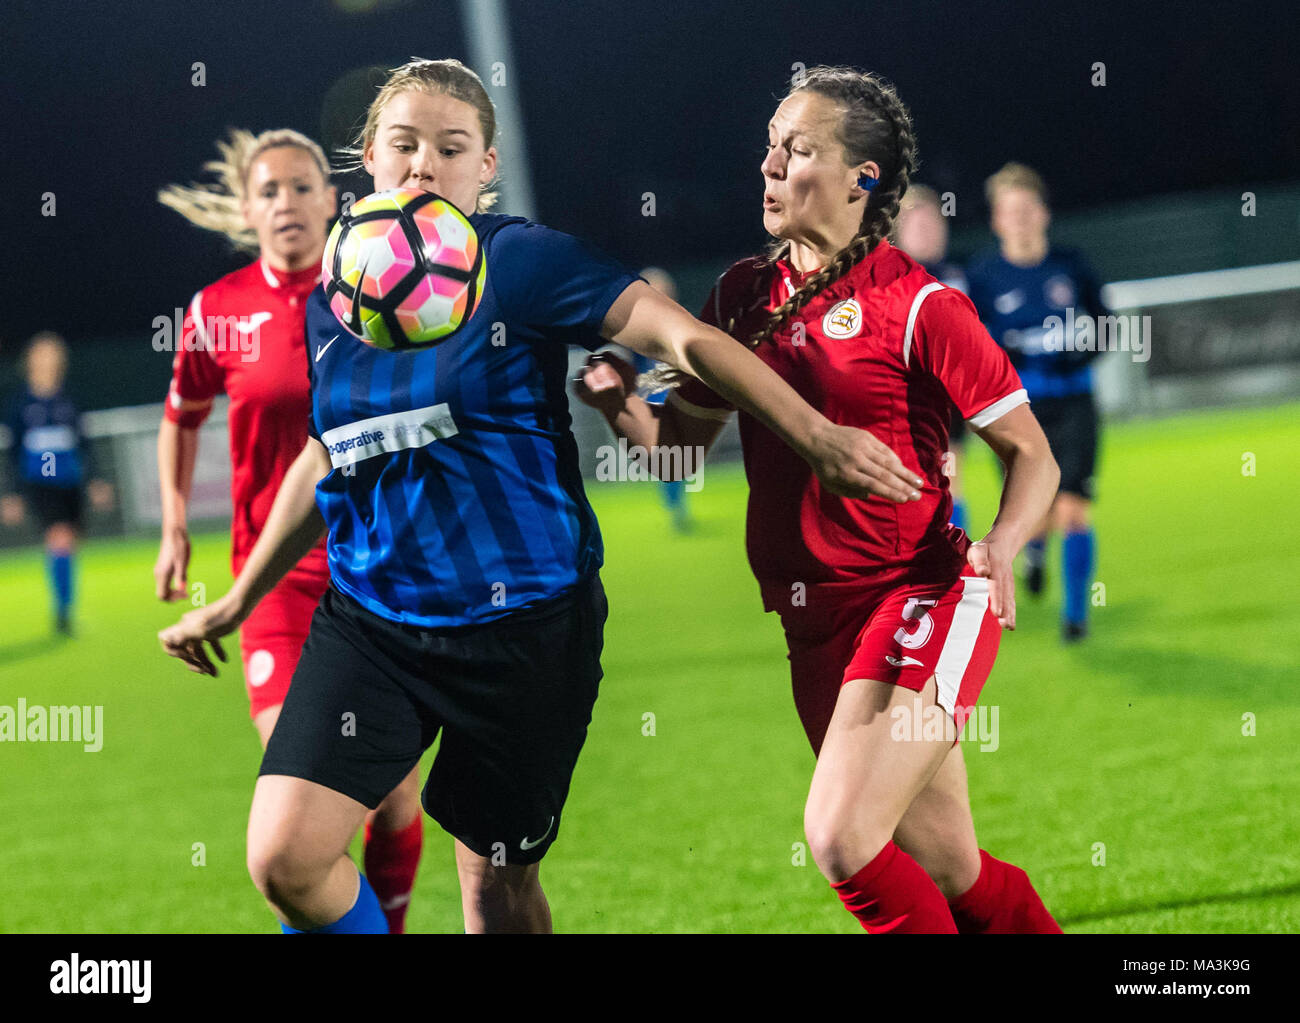 Averly Essex, 29th March 2018, BBC Essex Women;s Cup final, Brentwood Town Ladies, in blue,  (0) Vs C&K Basildon  (7) in red Credit Ian Davidson Alamy Live News Stock Photo